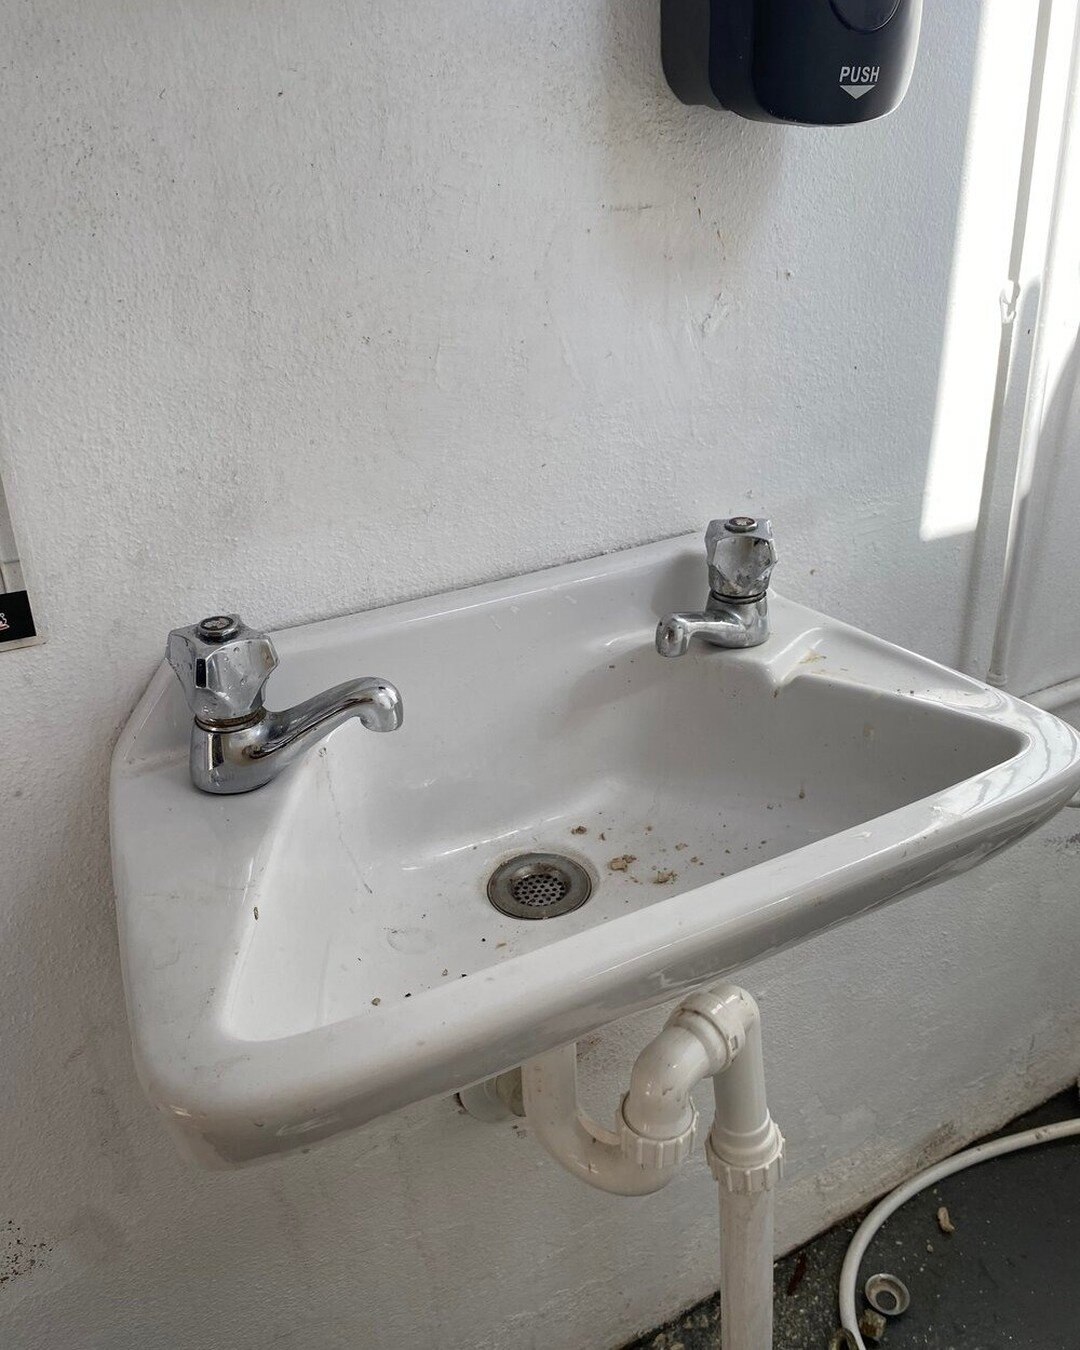 Tapware Upgrade, Residential Home, Greystanes, NSW

Sometimes simple is best! This customer called us out to remove the old pillar tapware and install a brand new modern style mixer tap for the outside bathroom.

Www.quartzplumbingservices.com.au 

.